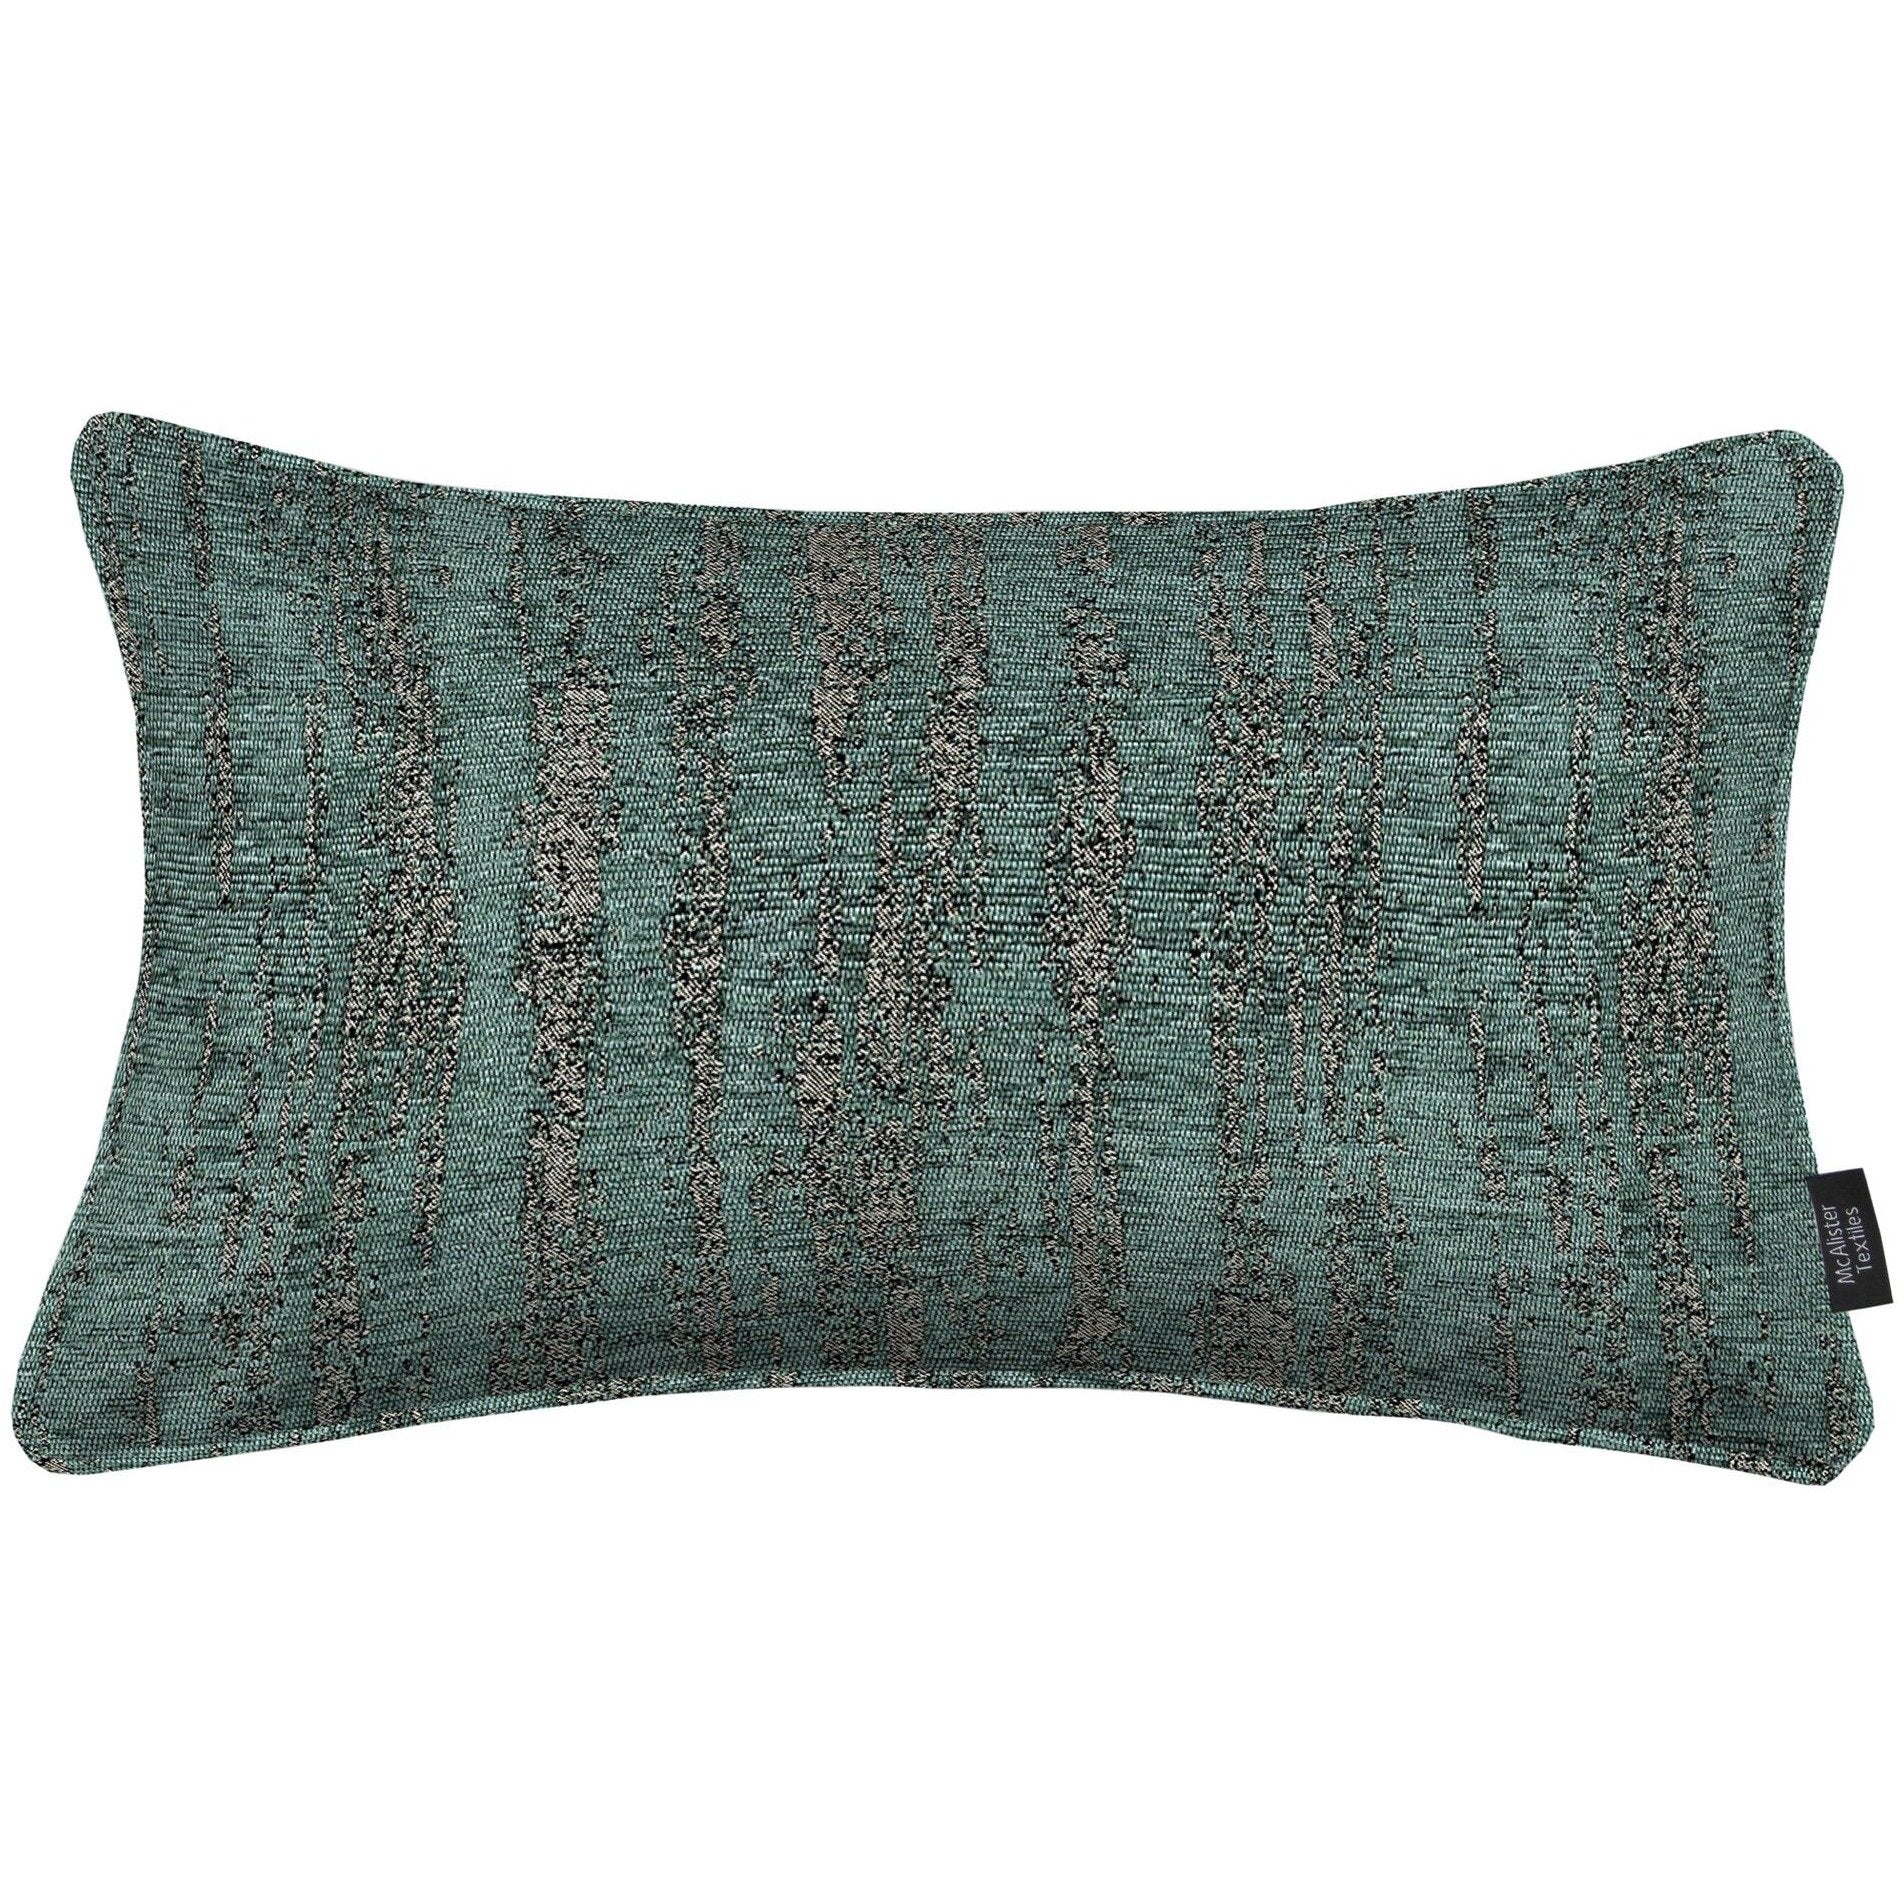 McAlister Textiles Textured Chenille Teal Cushion Cushions and Covers Cover Only 50cm x 30cm 